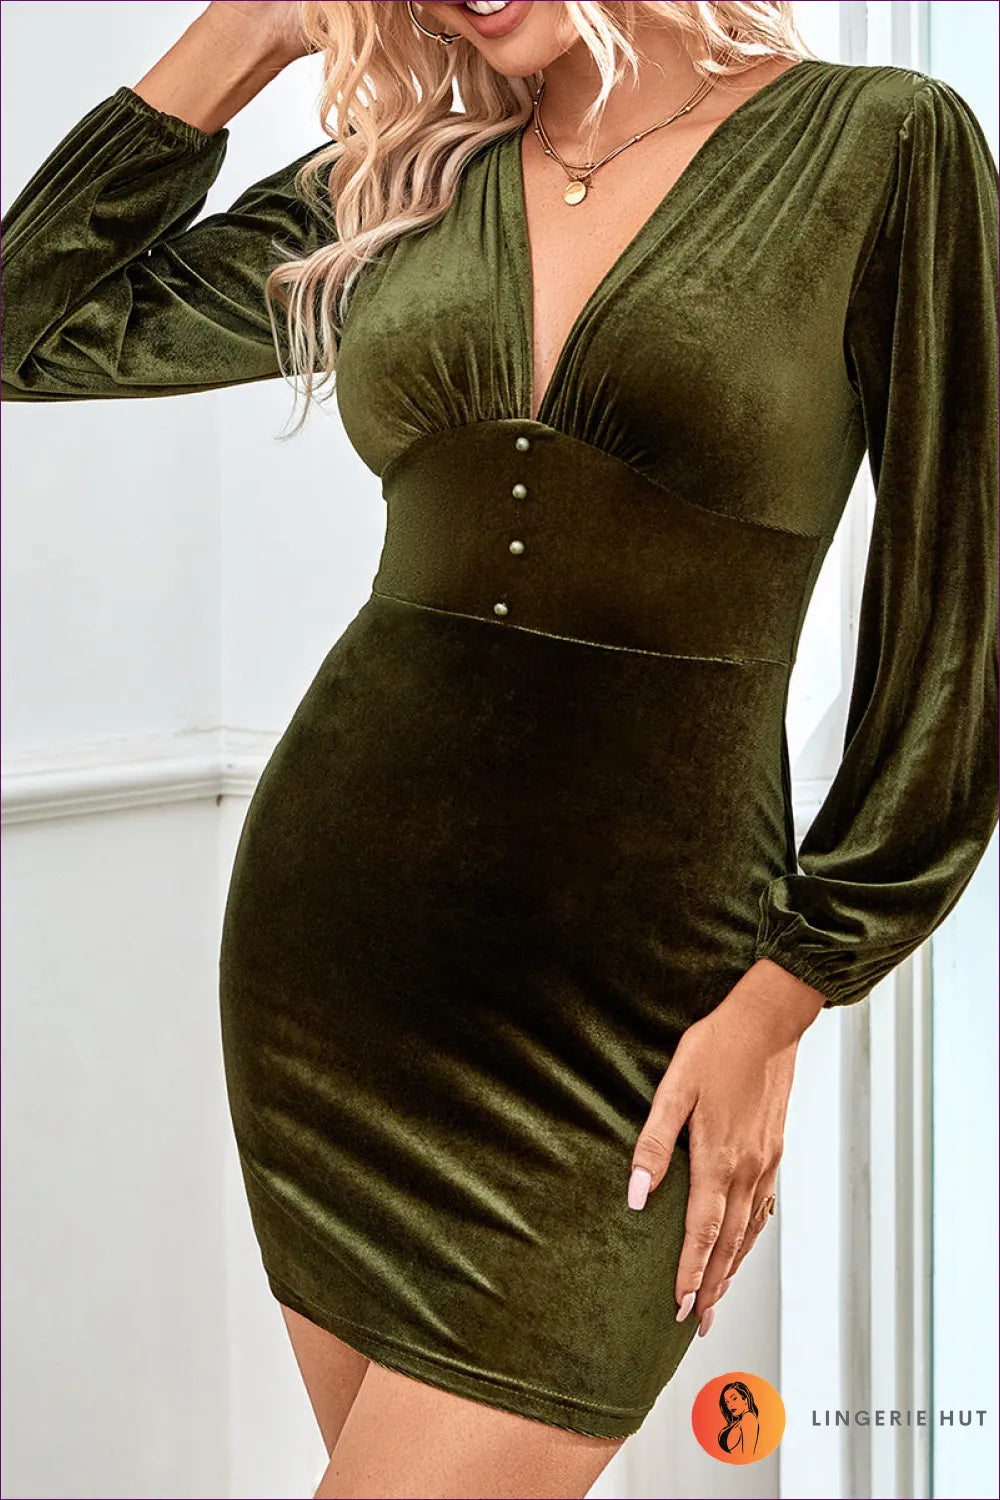 Wrap Yourself In The Embrace Of Elegance With Lingerie Hut’s Velvet V-neck Bodycon. Its Luxurious Fabric